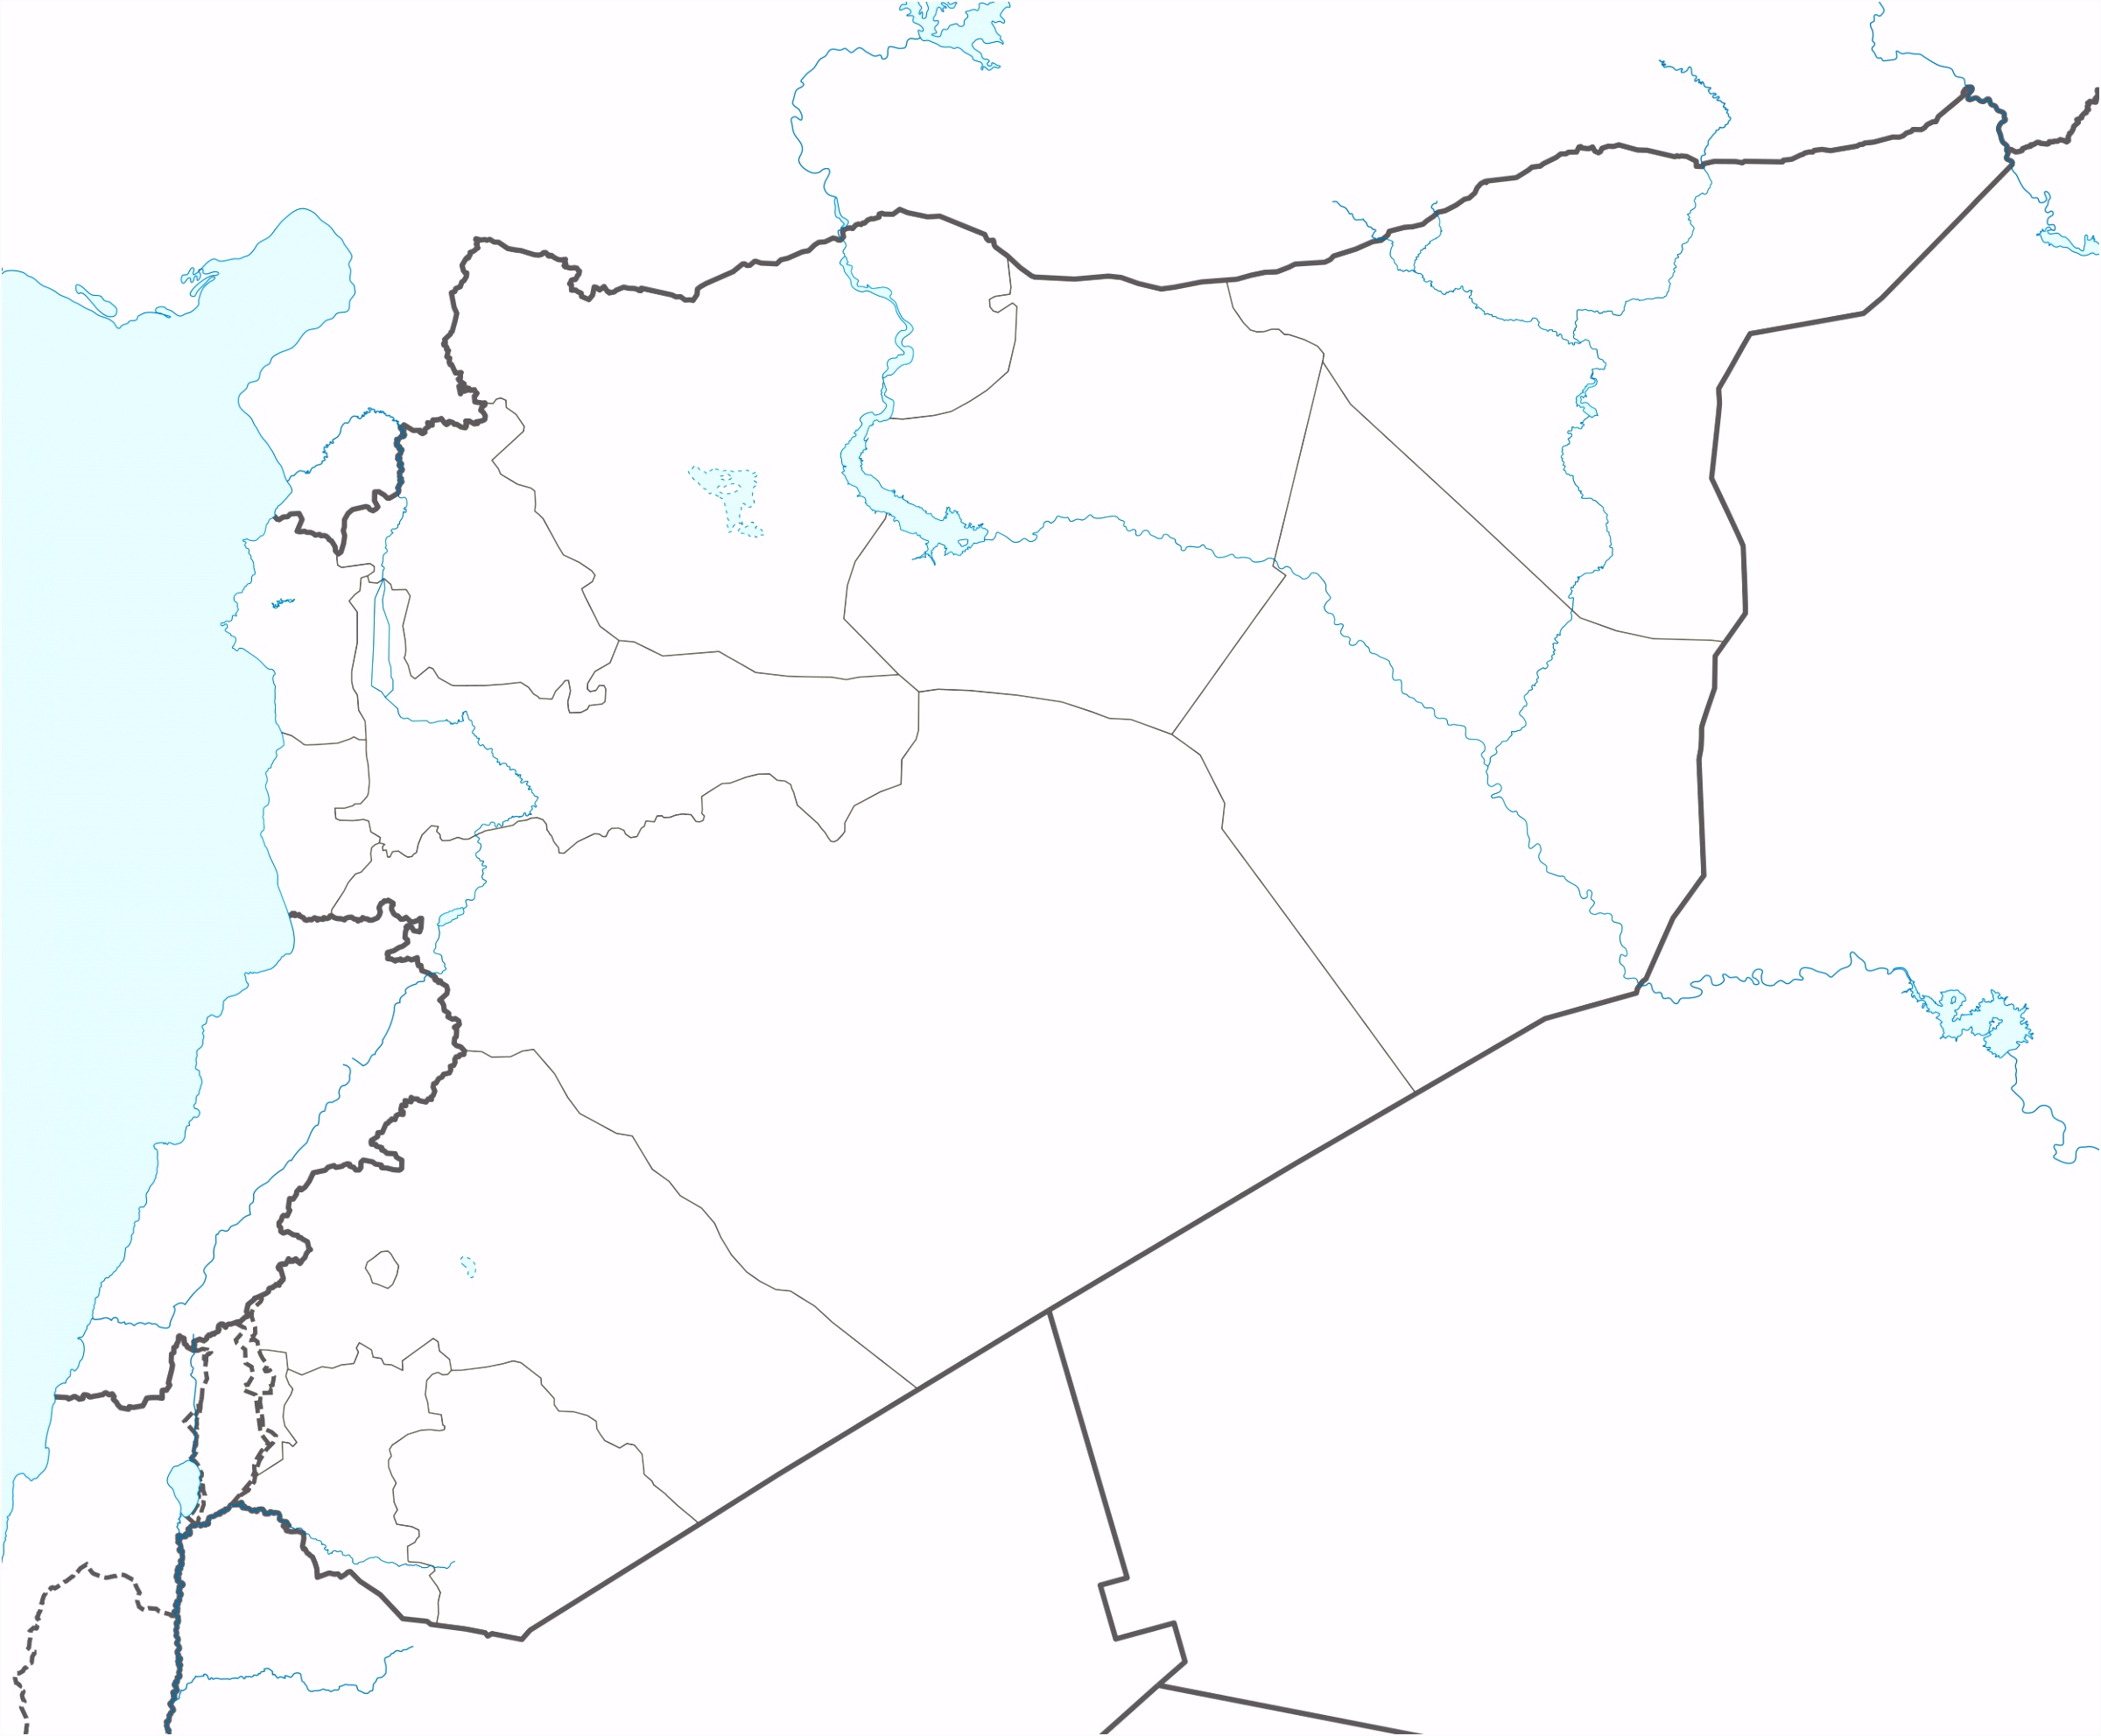 Template Syrian Civil War detailed map